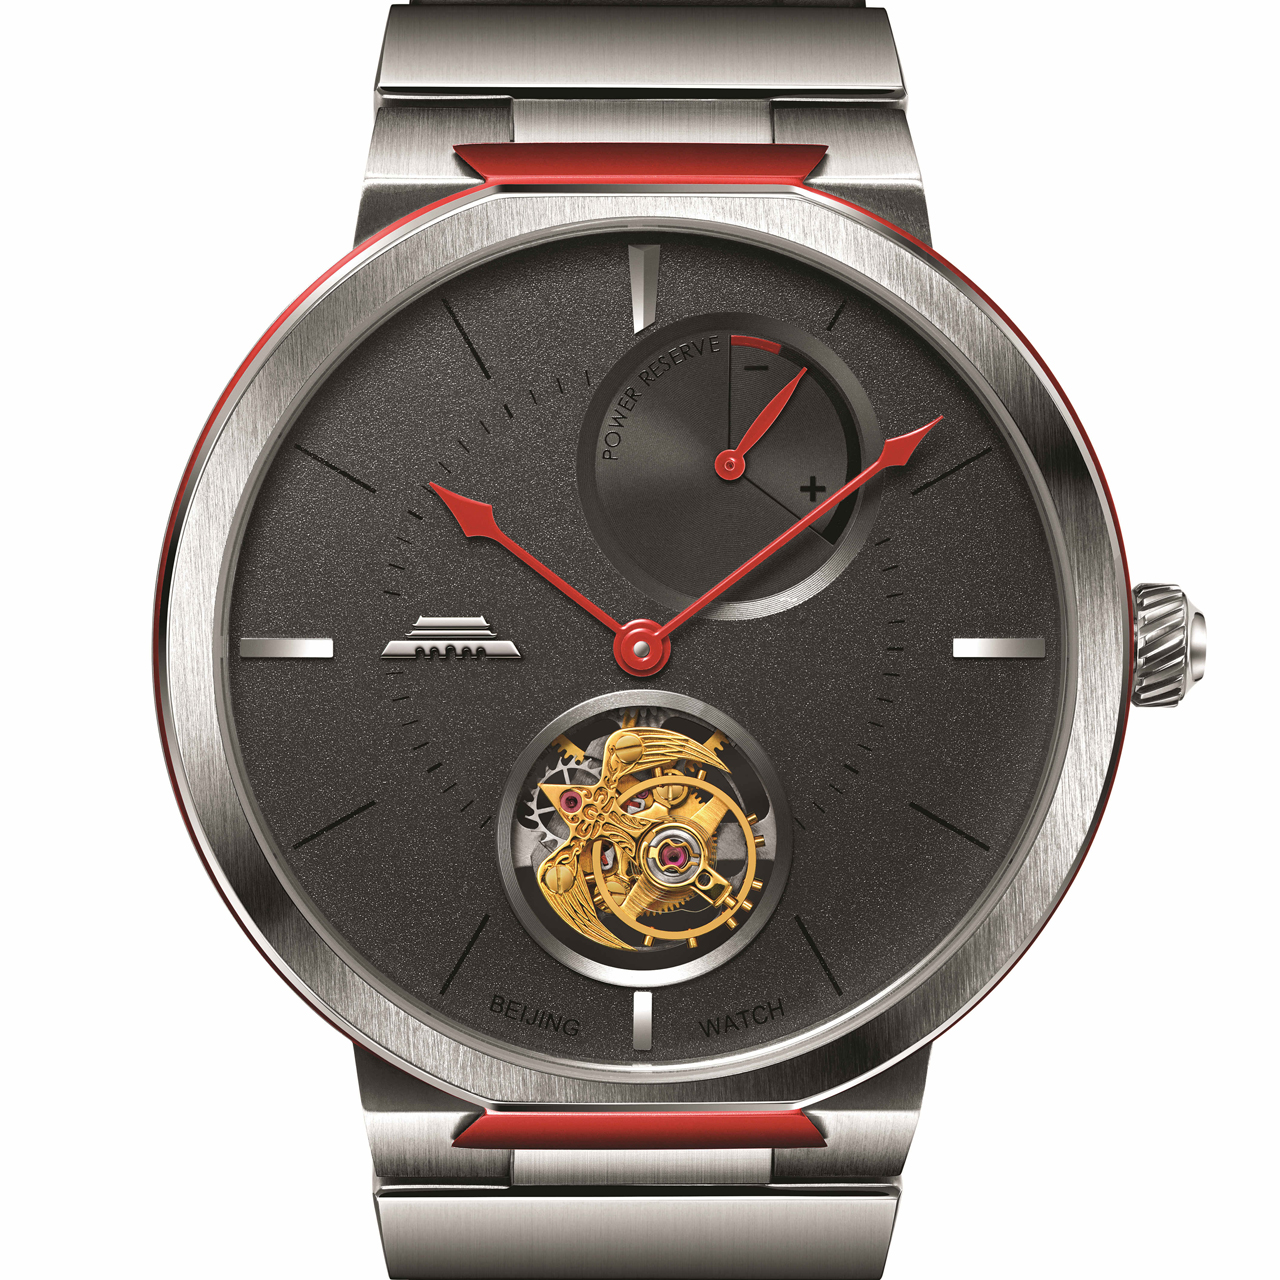 Beijing watch company state of mind